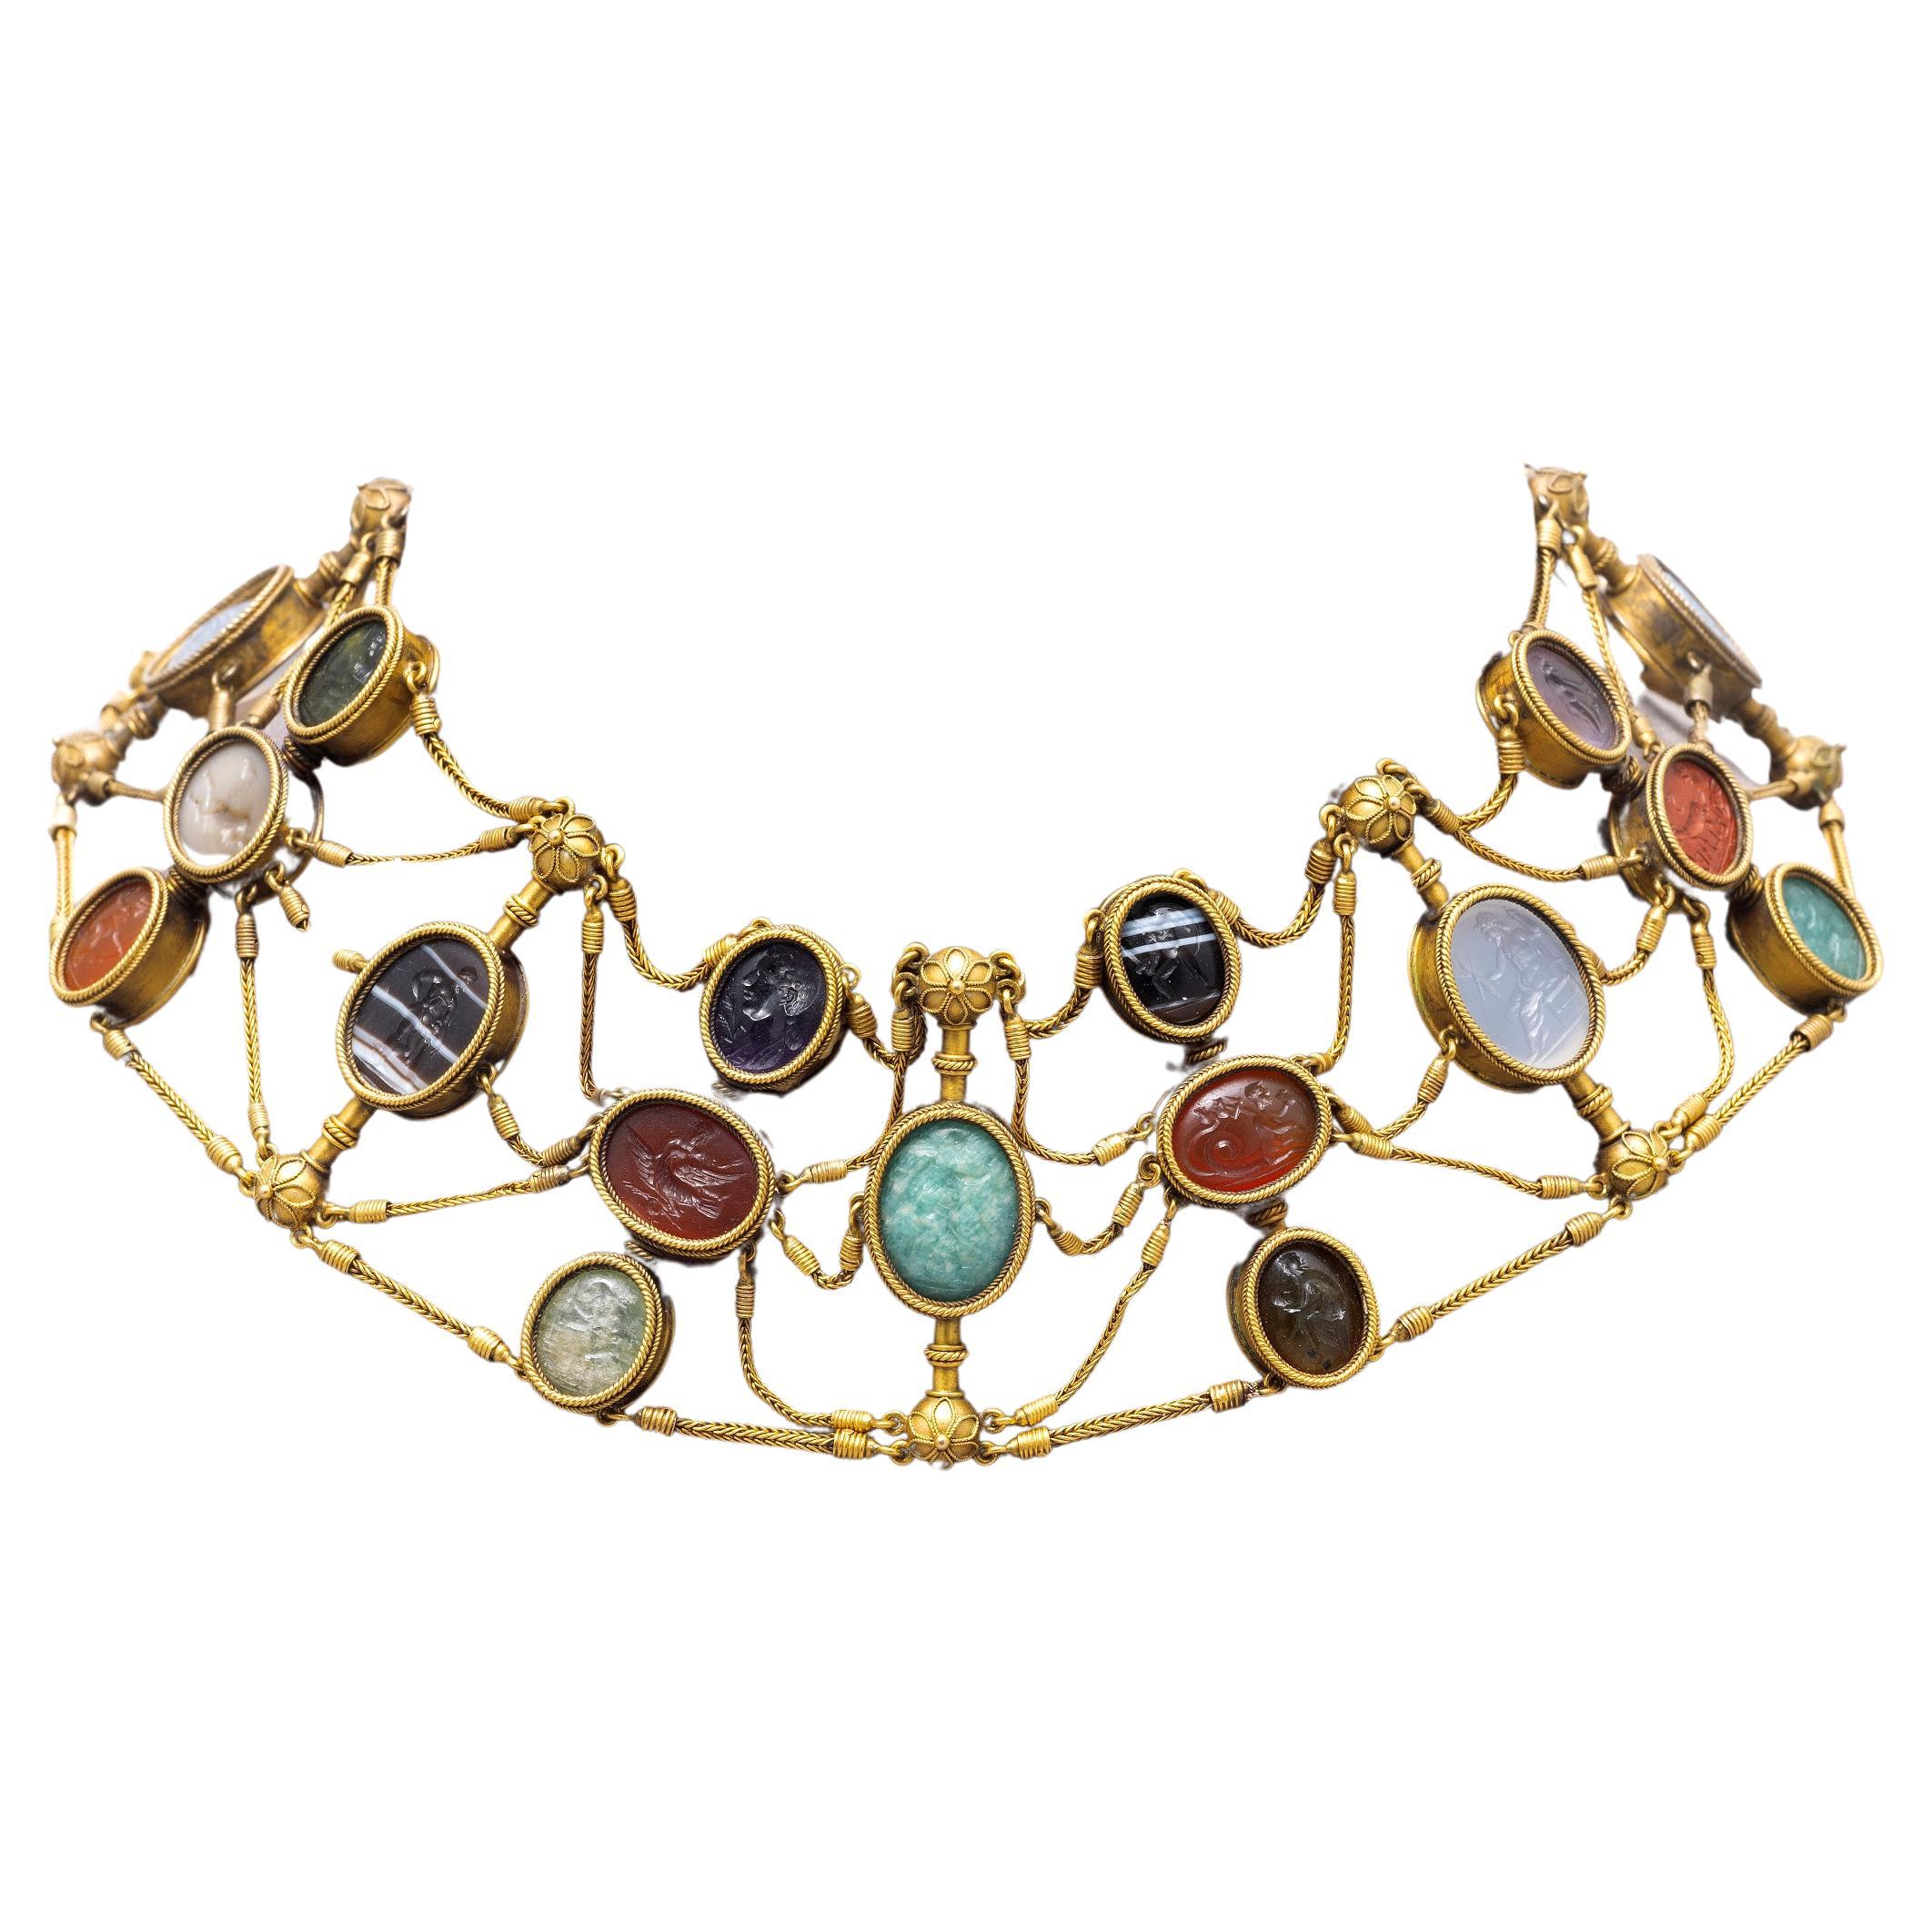 Archaeological-Revival Gold And Hardstone Intaglio Necklace Italy Circa 1870